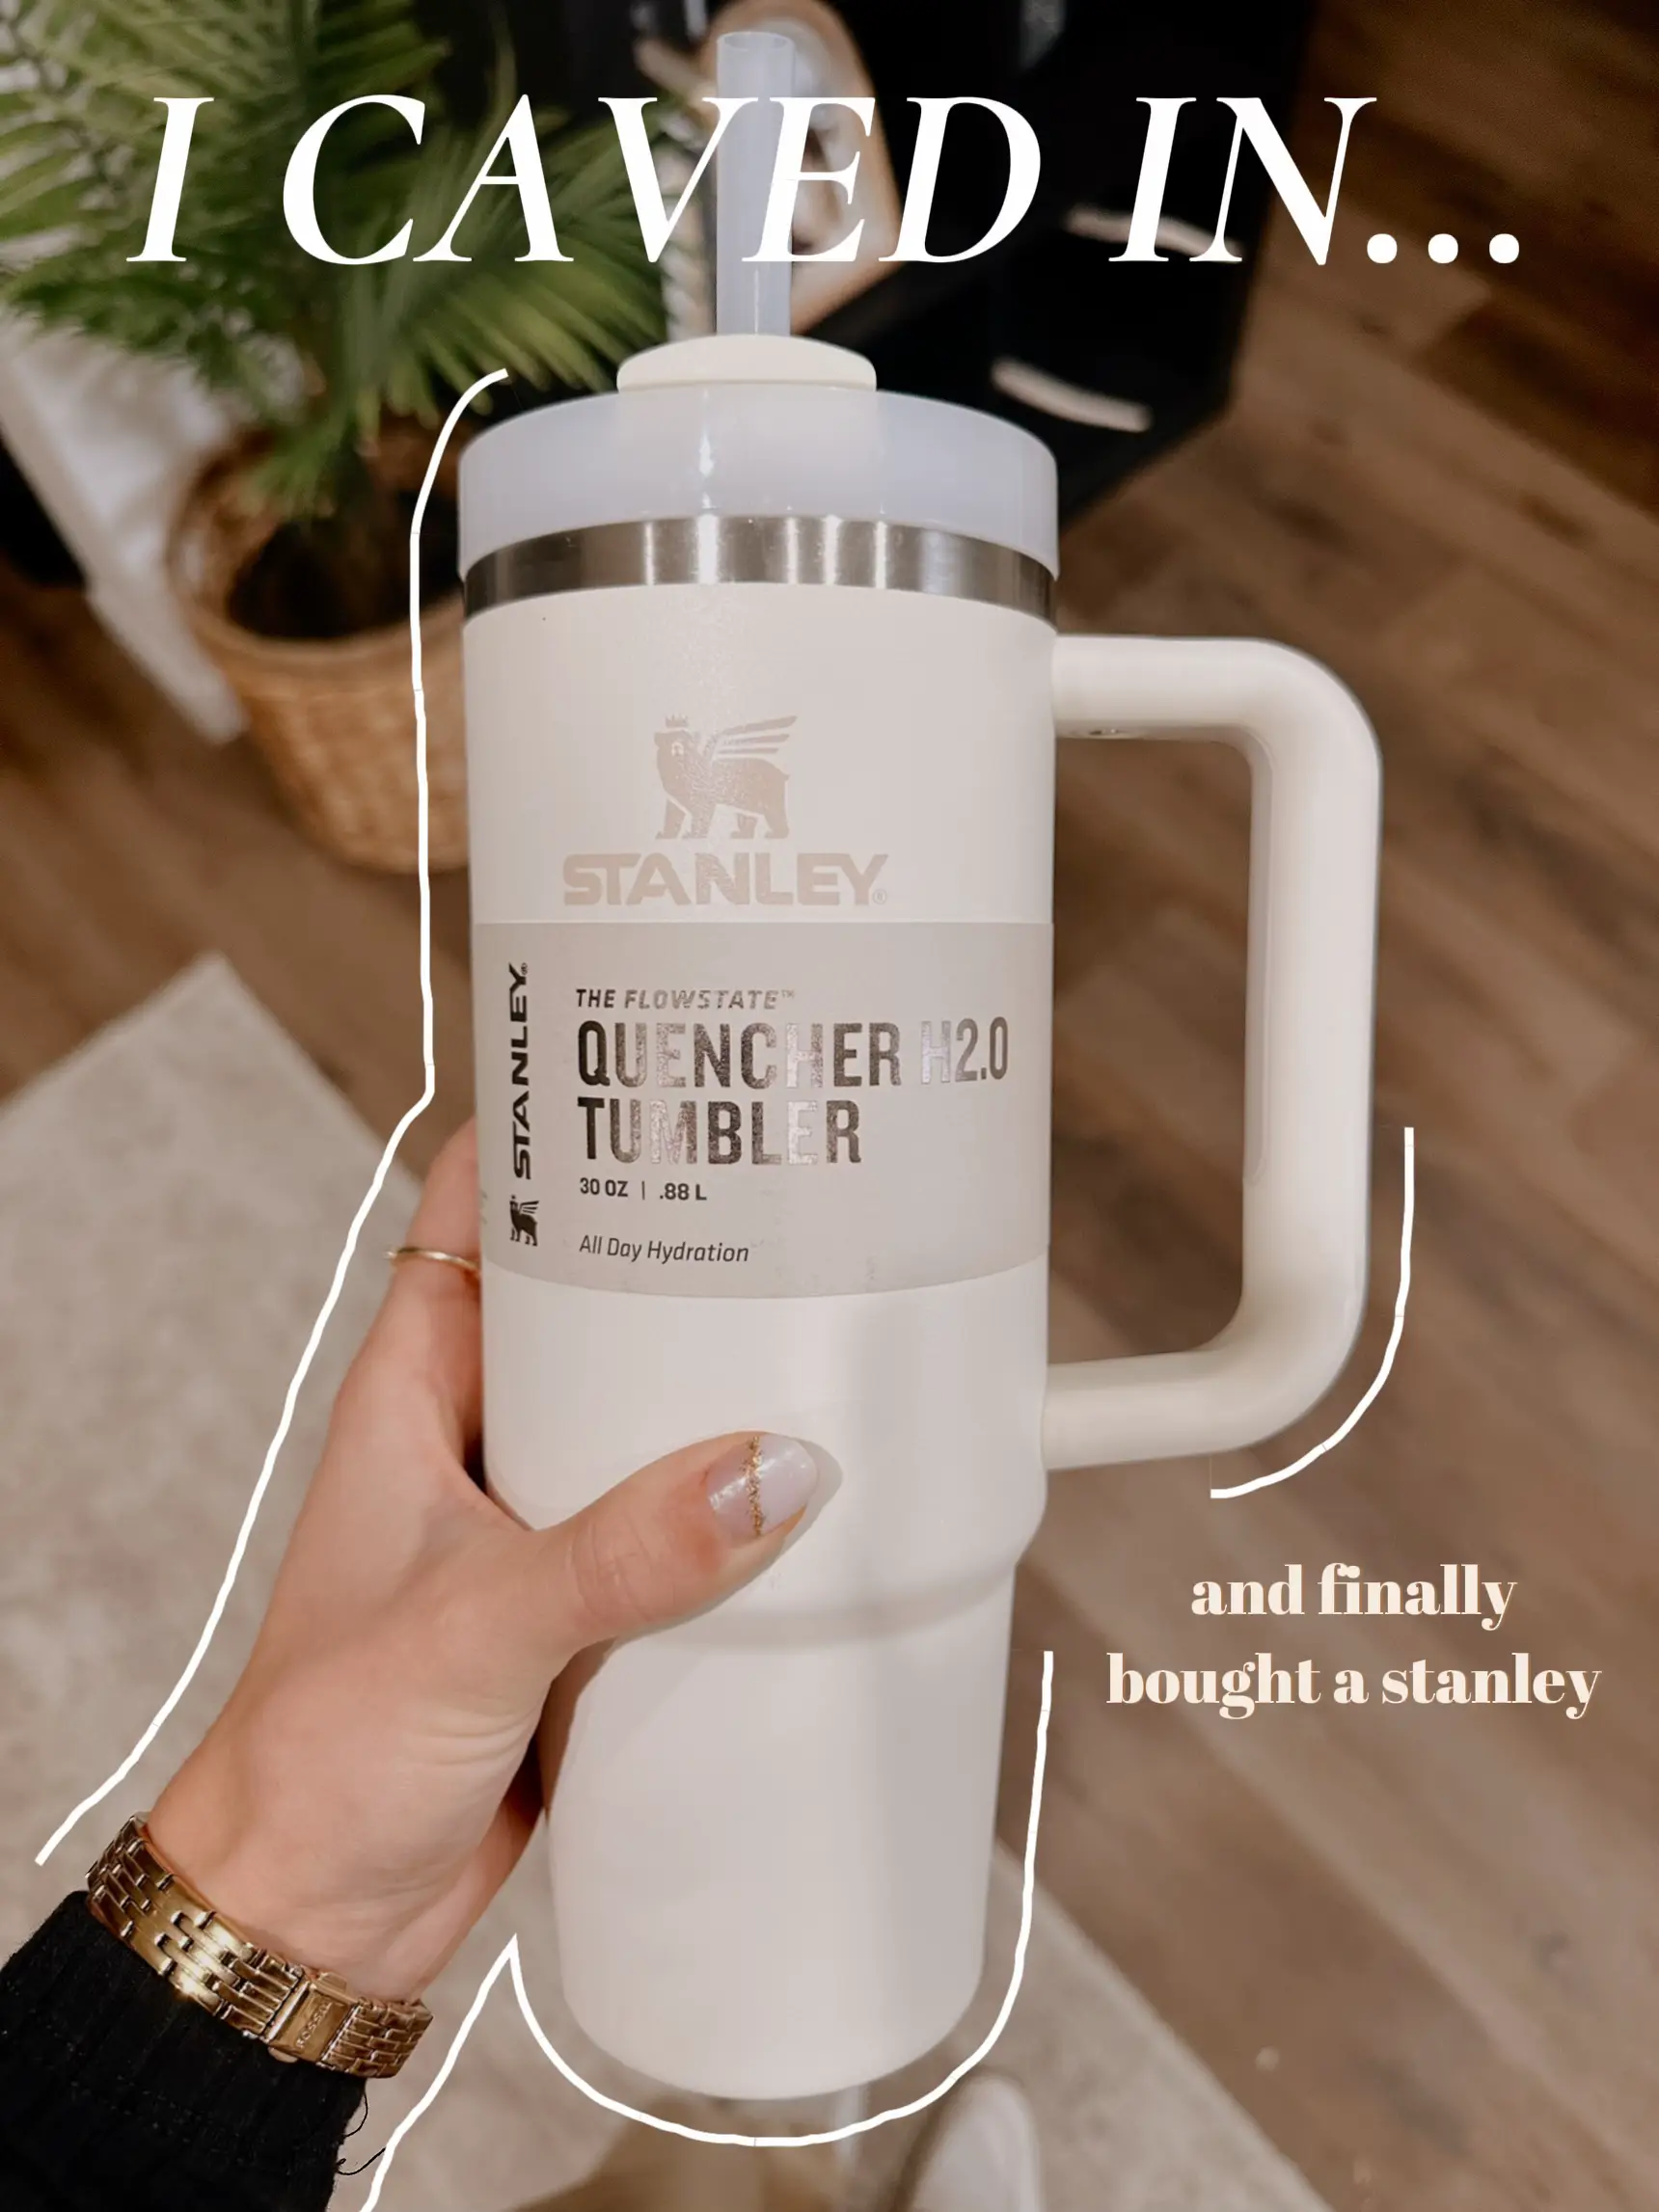 is the stanley 40 oz better or 30 oz｜TikTok Search